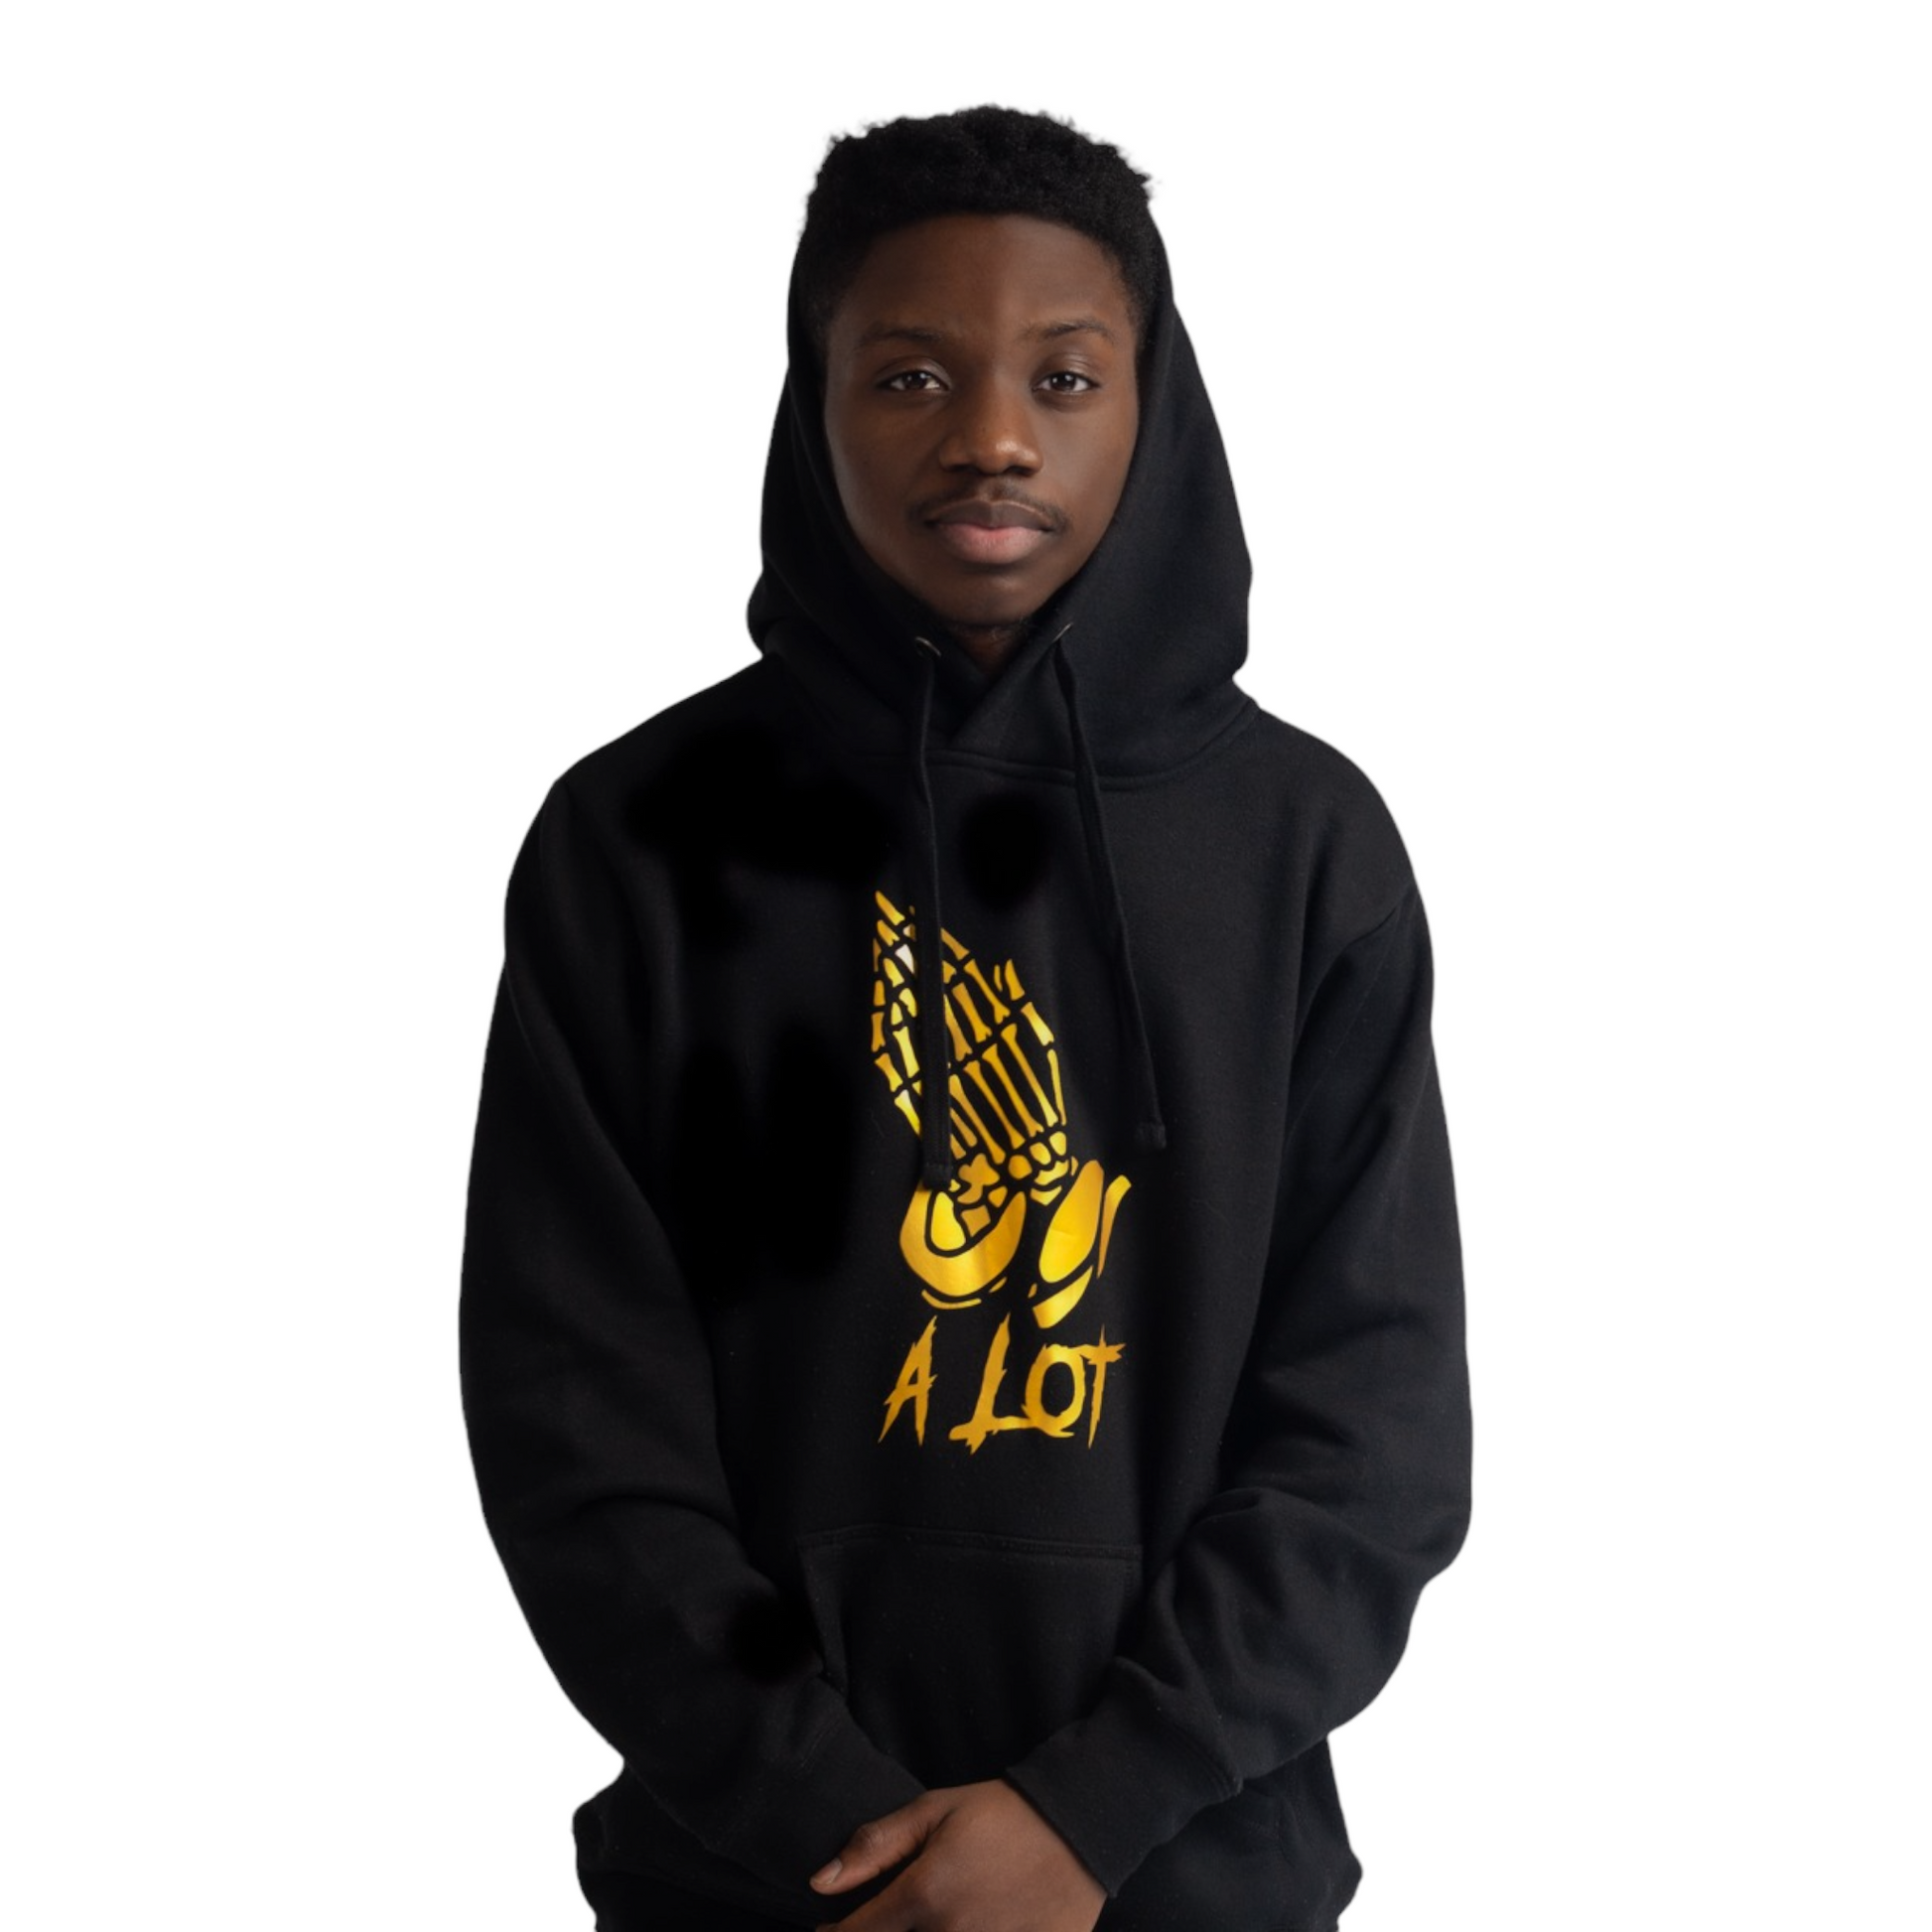 Golden metallic Design - PRAY A LOT Hoodie - men and women sizes - **Exclusive Limited Release - TheSinners2Saints